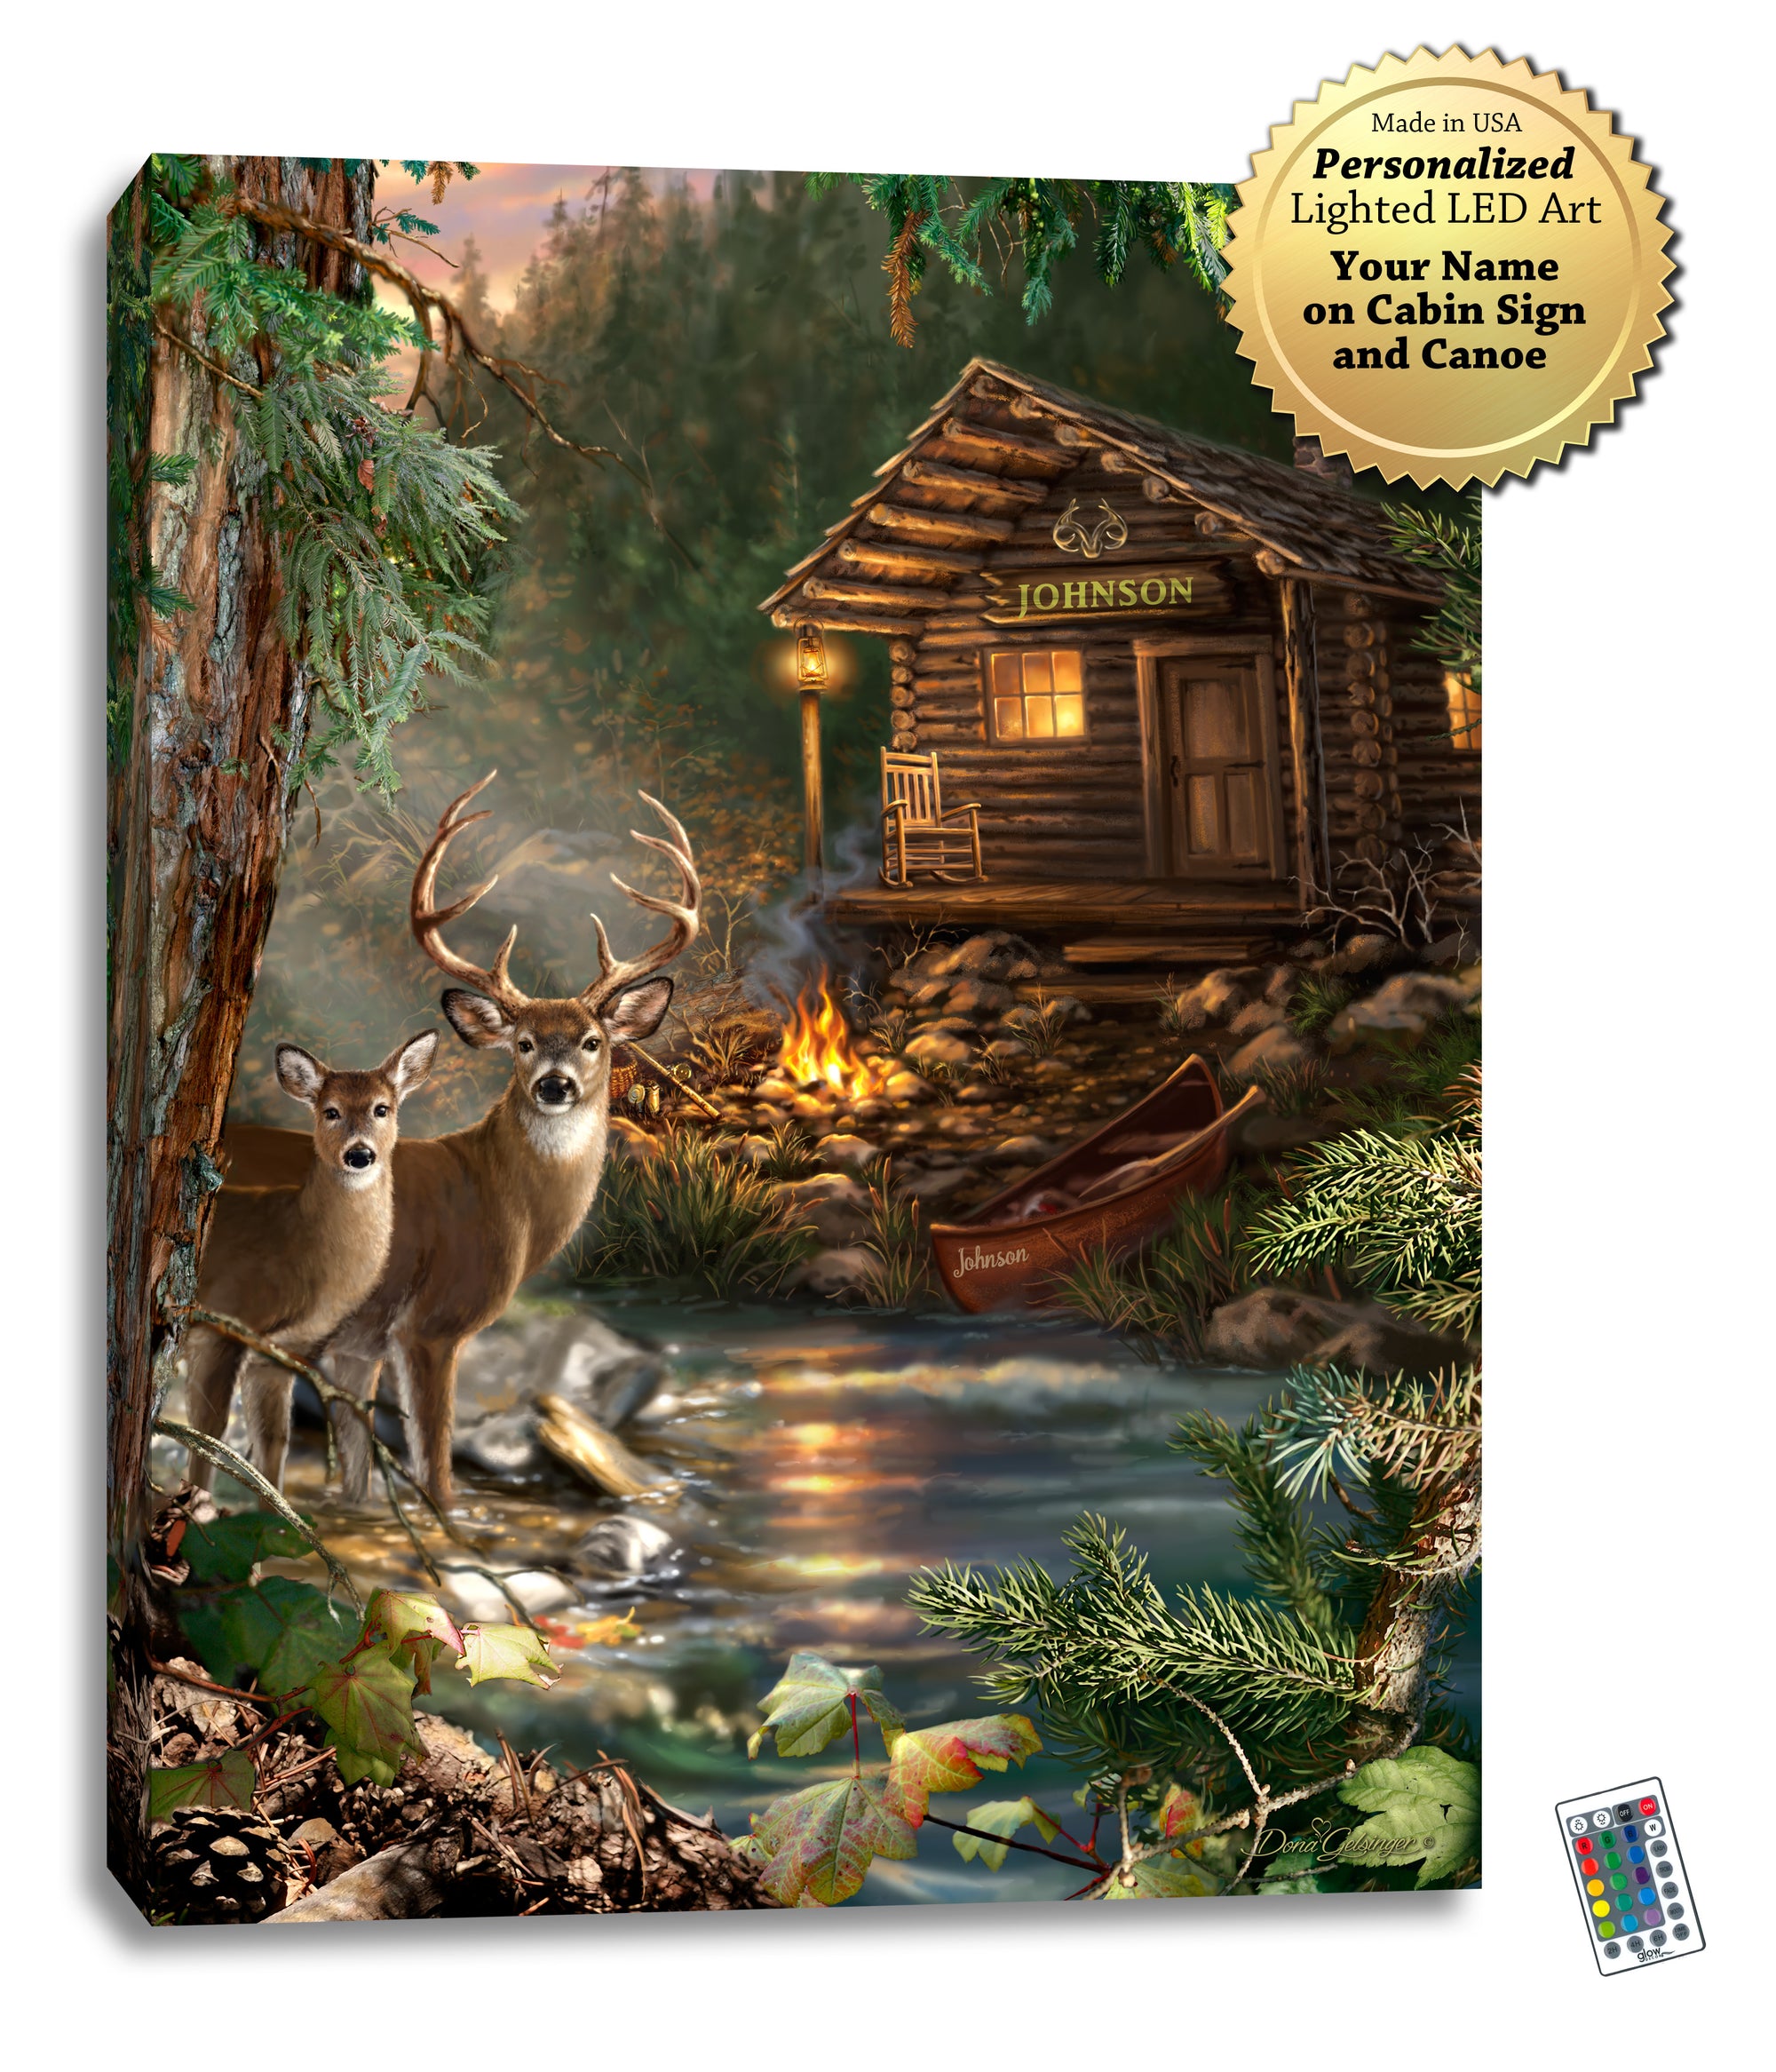 This breathtaking piece captures the serene beauty of a buck and a doe standing in the tranquil waters of a small river, with a rustic canoe resting on the bank nearby. The glow of the LED illumination adds a touch of warmth to the idyllic scene, creating an enchanting atmosphere.